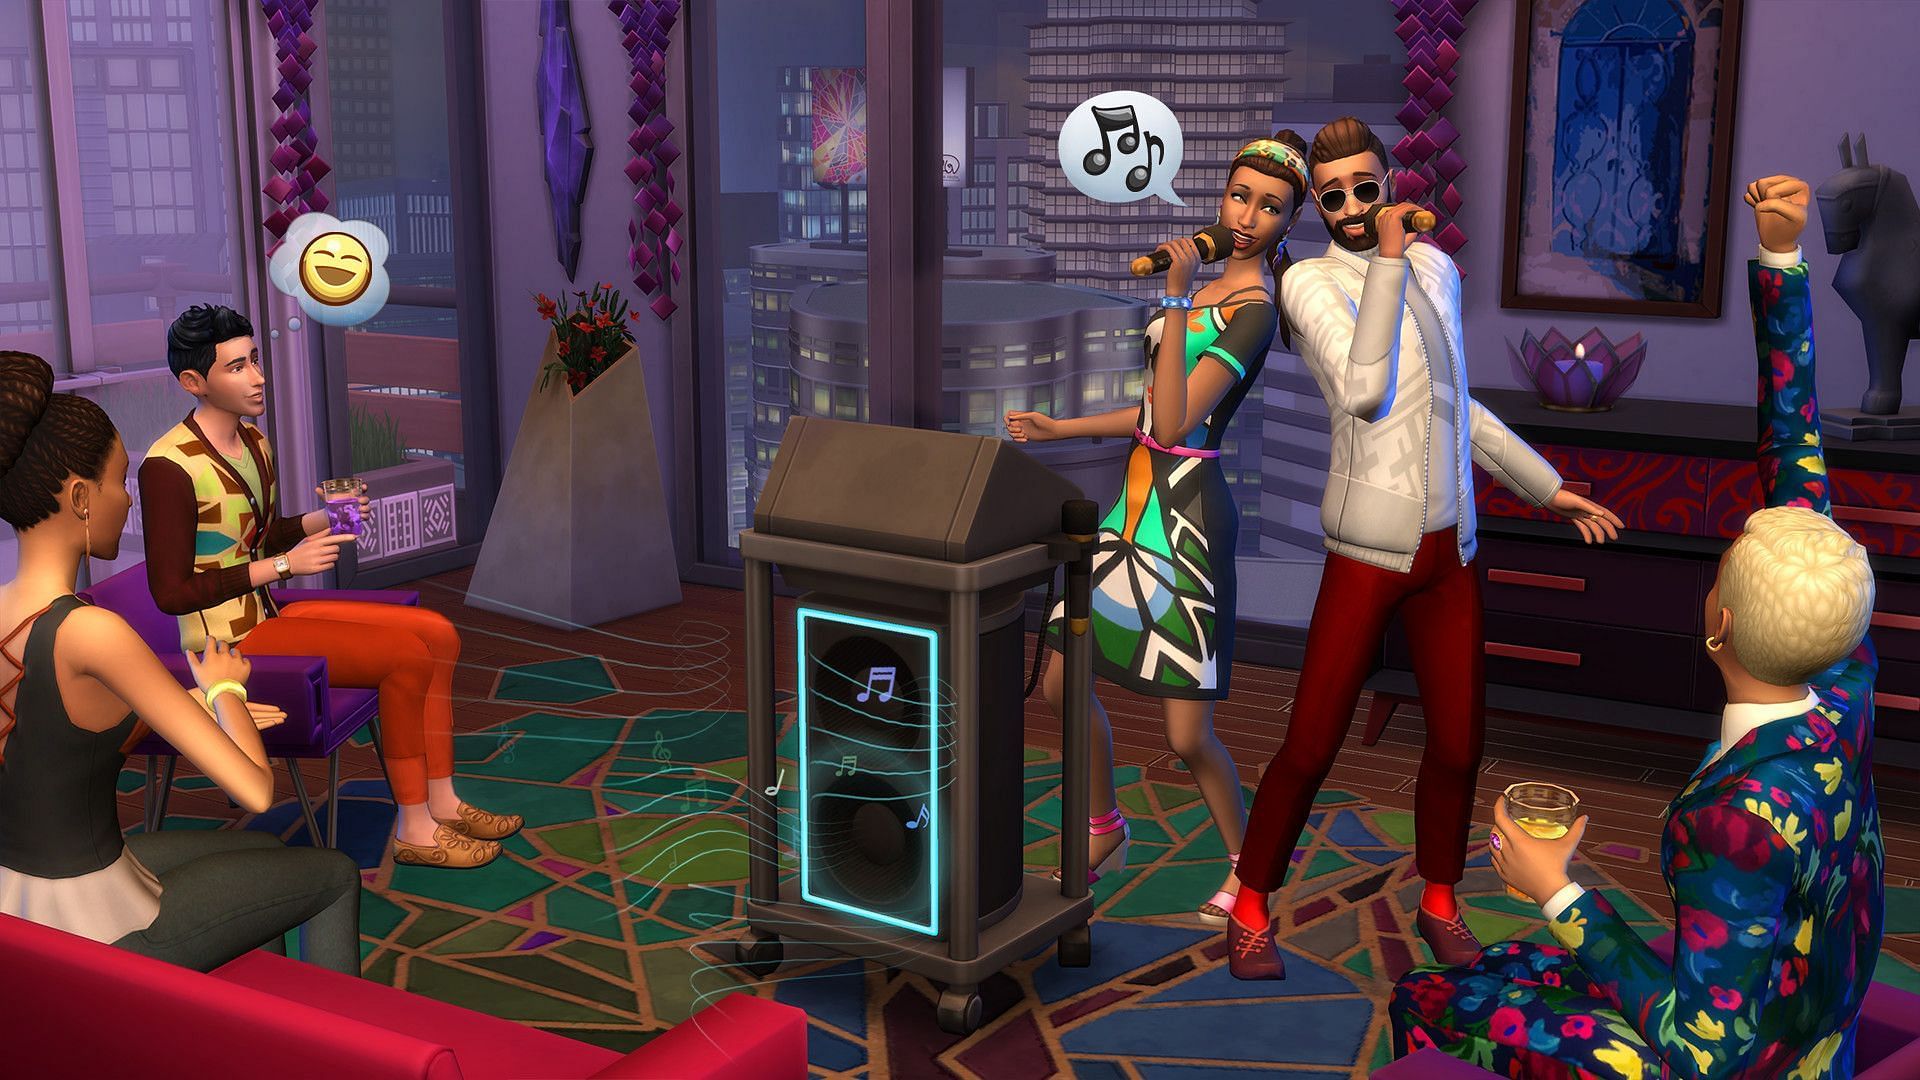 City Living is one of the most colorful Sims 4 Expansion Packs (Image via Steam)